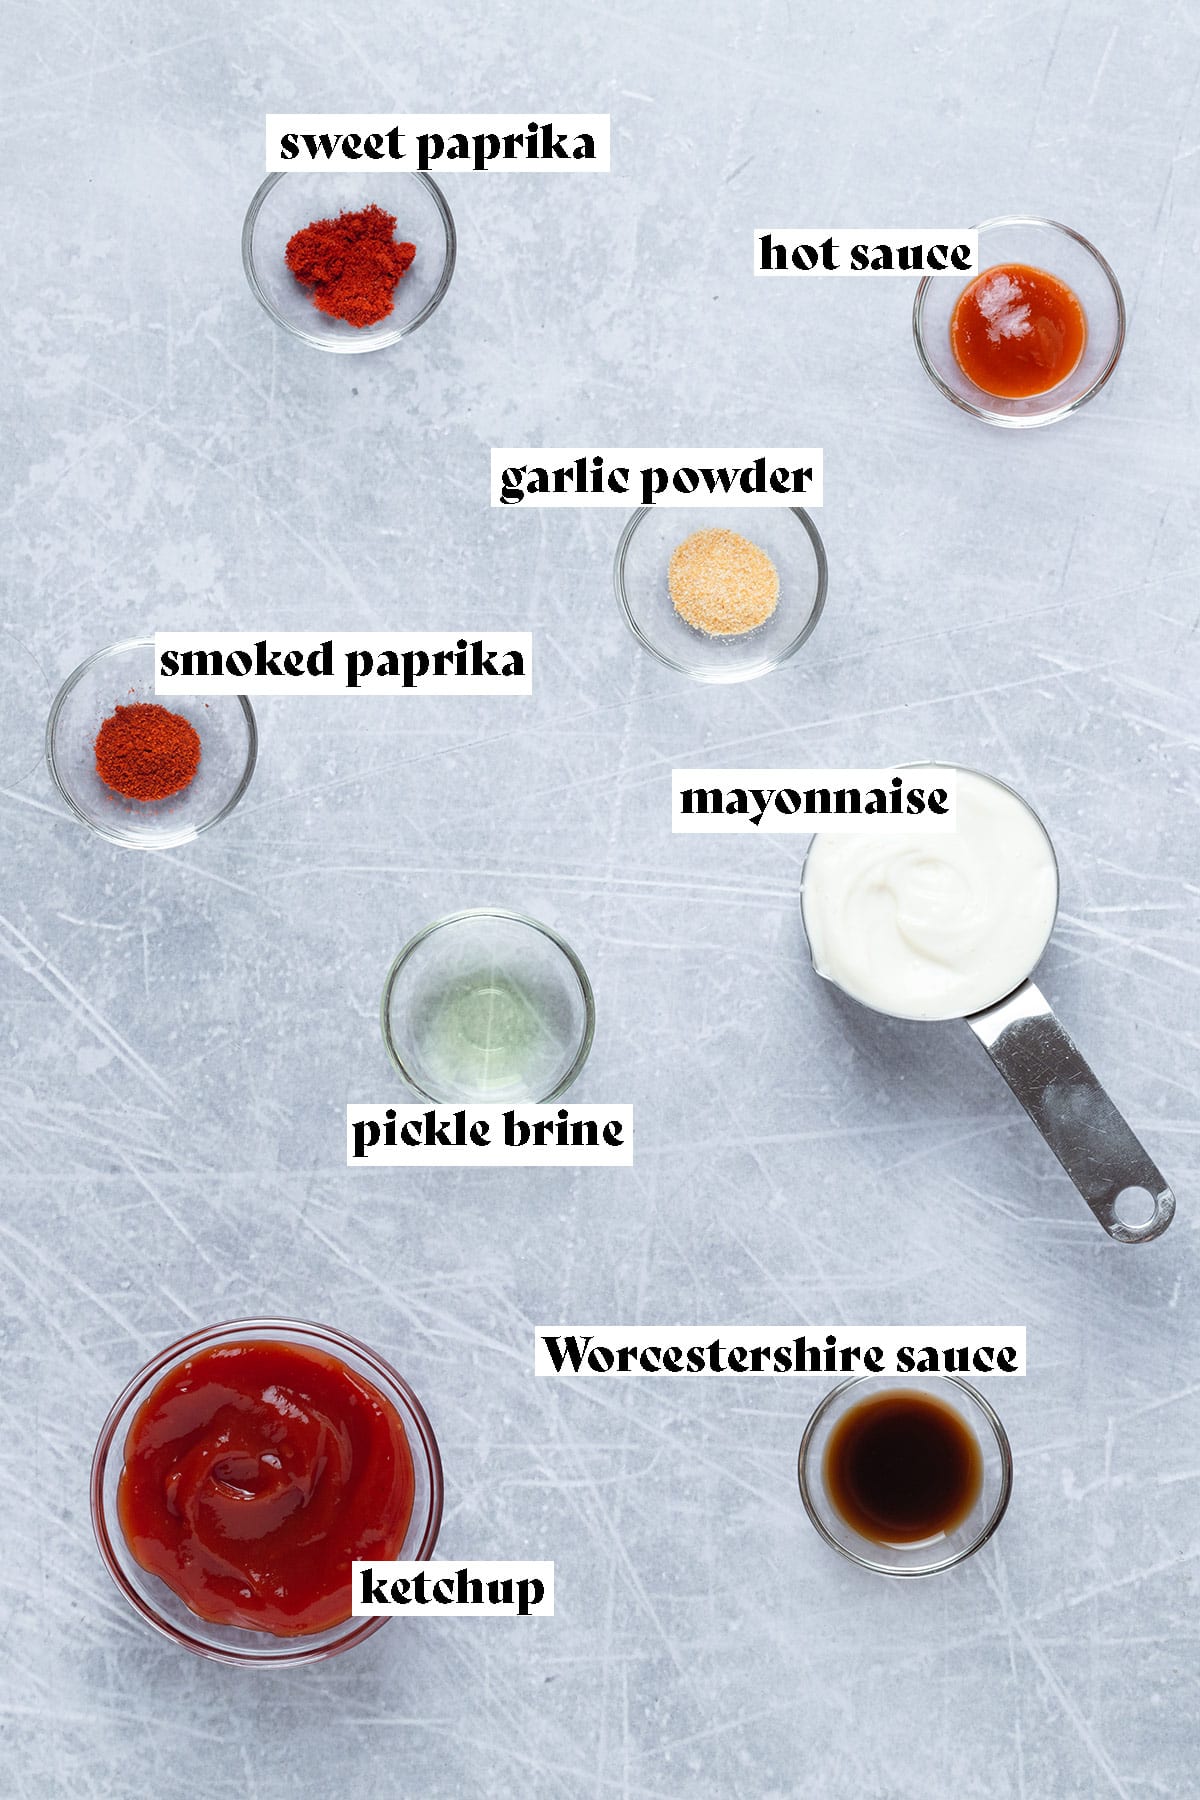 Ingredients such as ketchup, mayonnaise, and spices laid out on a grey background.